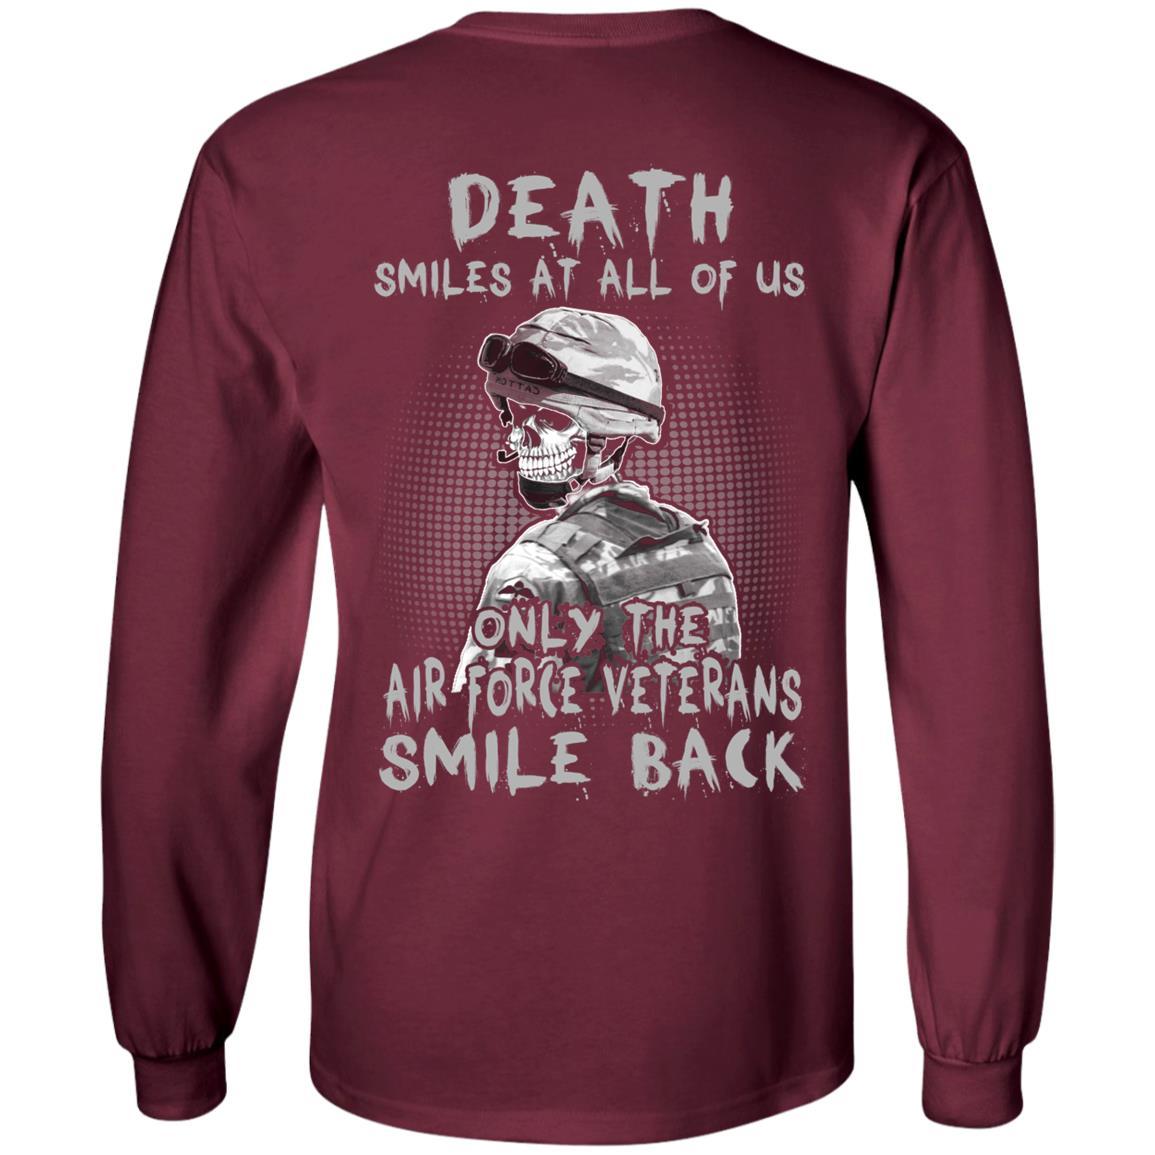 Death Smiles At All Of Us - Only The Air Force Veterans Smile Back Men T Shirt On Back-TShirt-USAF-Veterans Nation